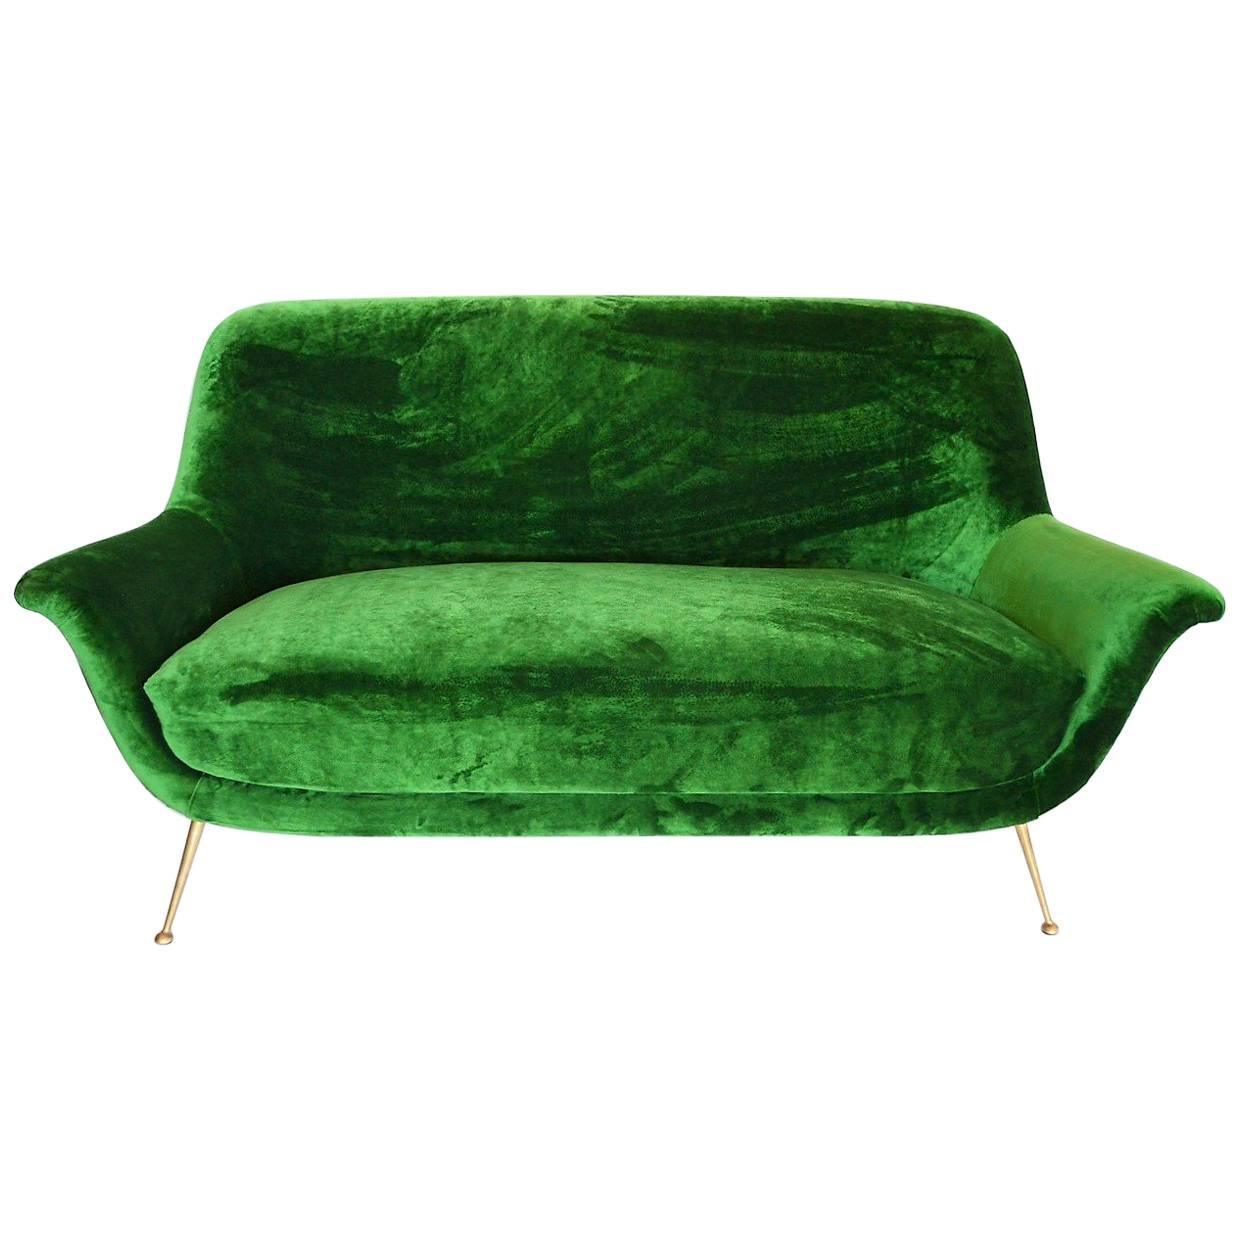 Magnificent Italian Mid-Century Sofa Reupholstered with Emerald Velvet, 1950s